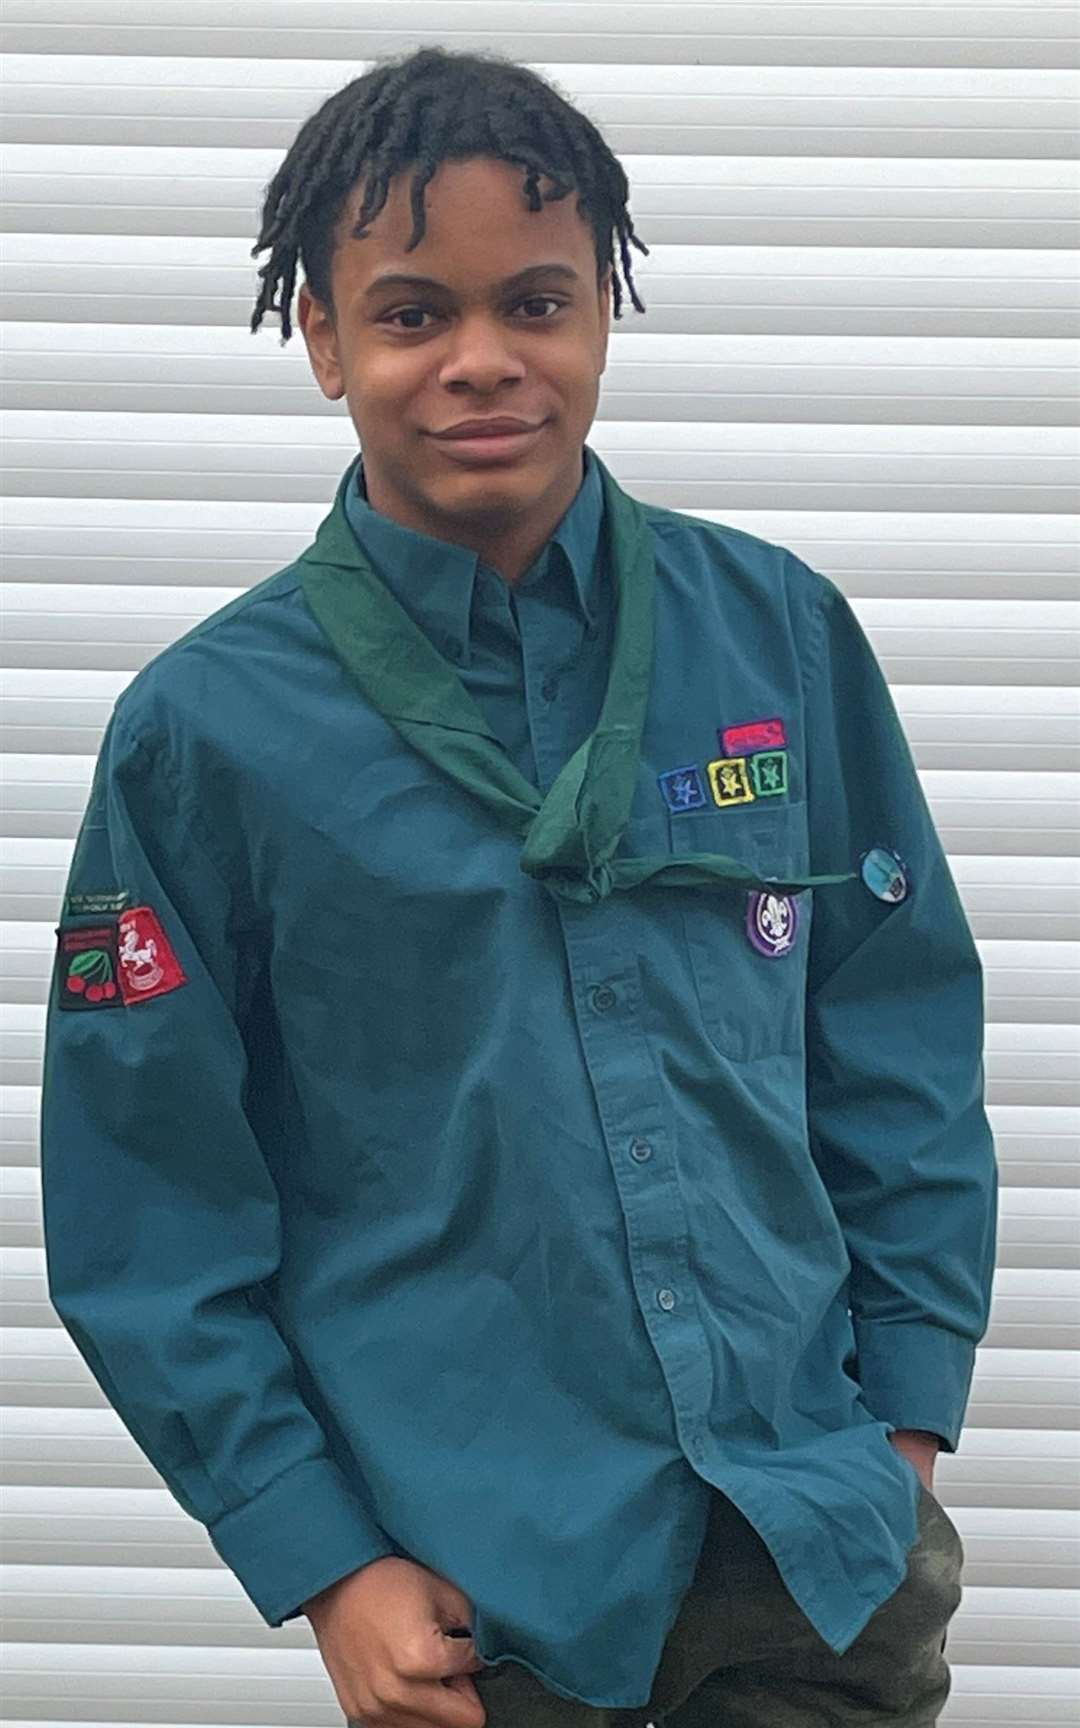 Christian Gayle is hoping to raise £4,000 for the World Scout Jamboree in 2023